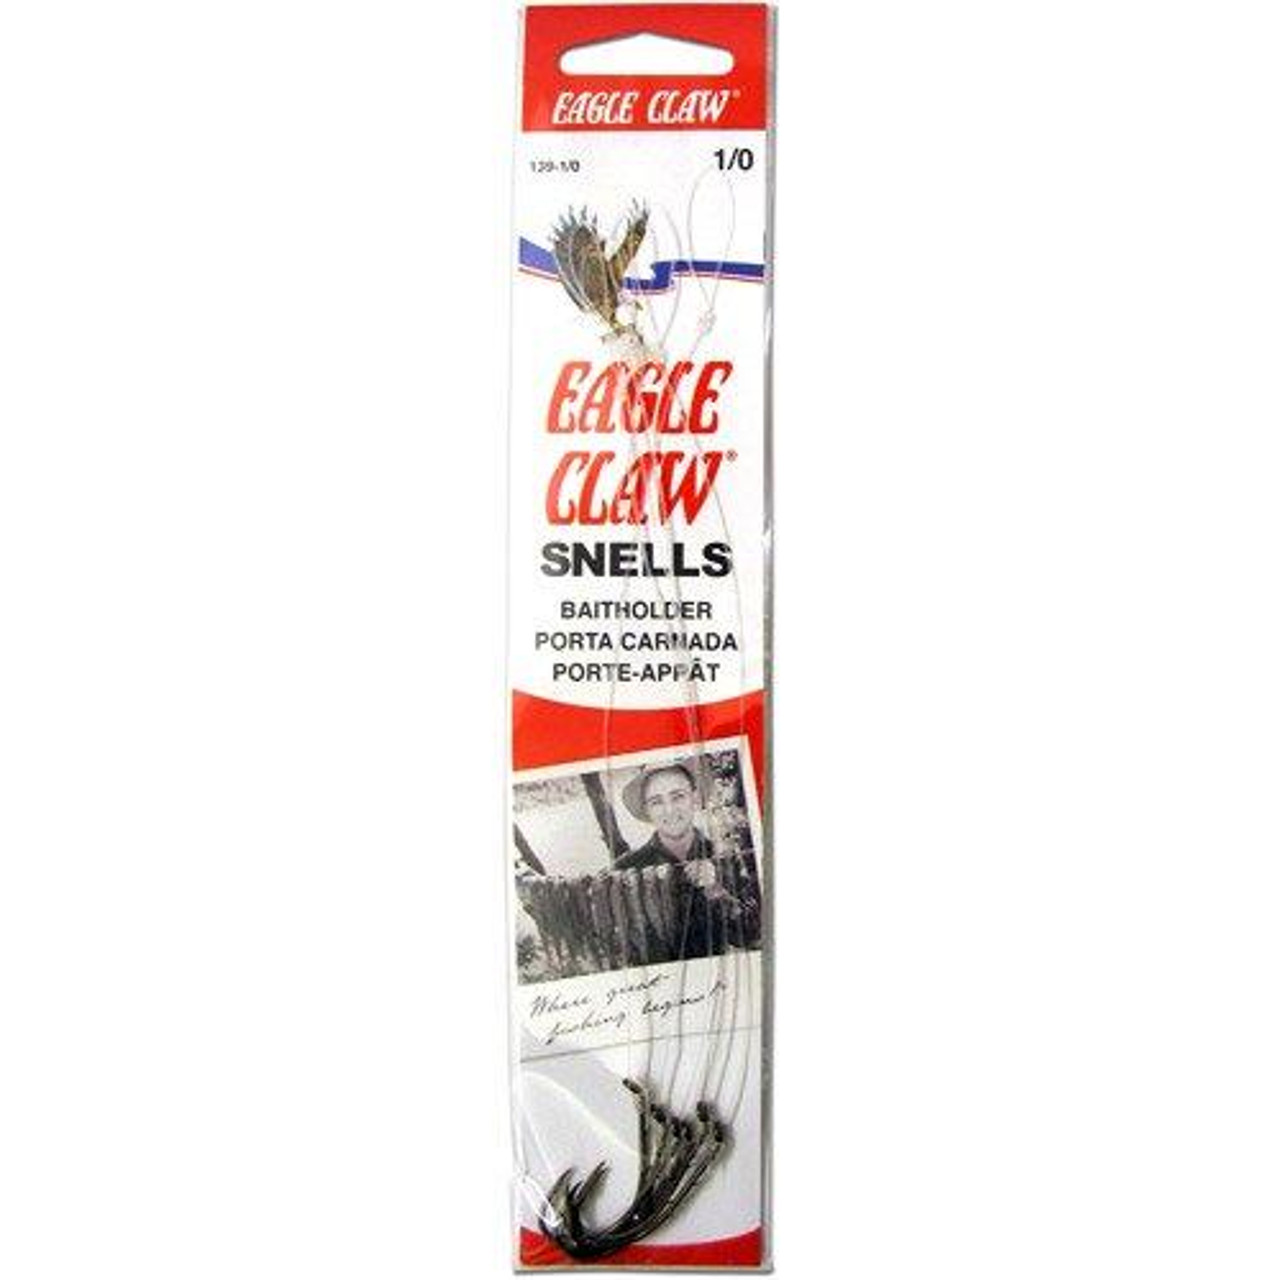 Eagle Claw Trout Fishing Hooks Snelled for sale